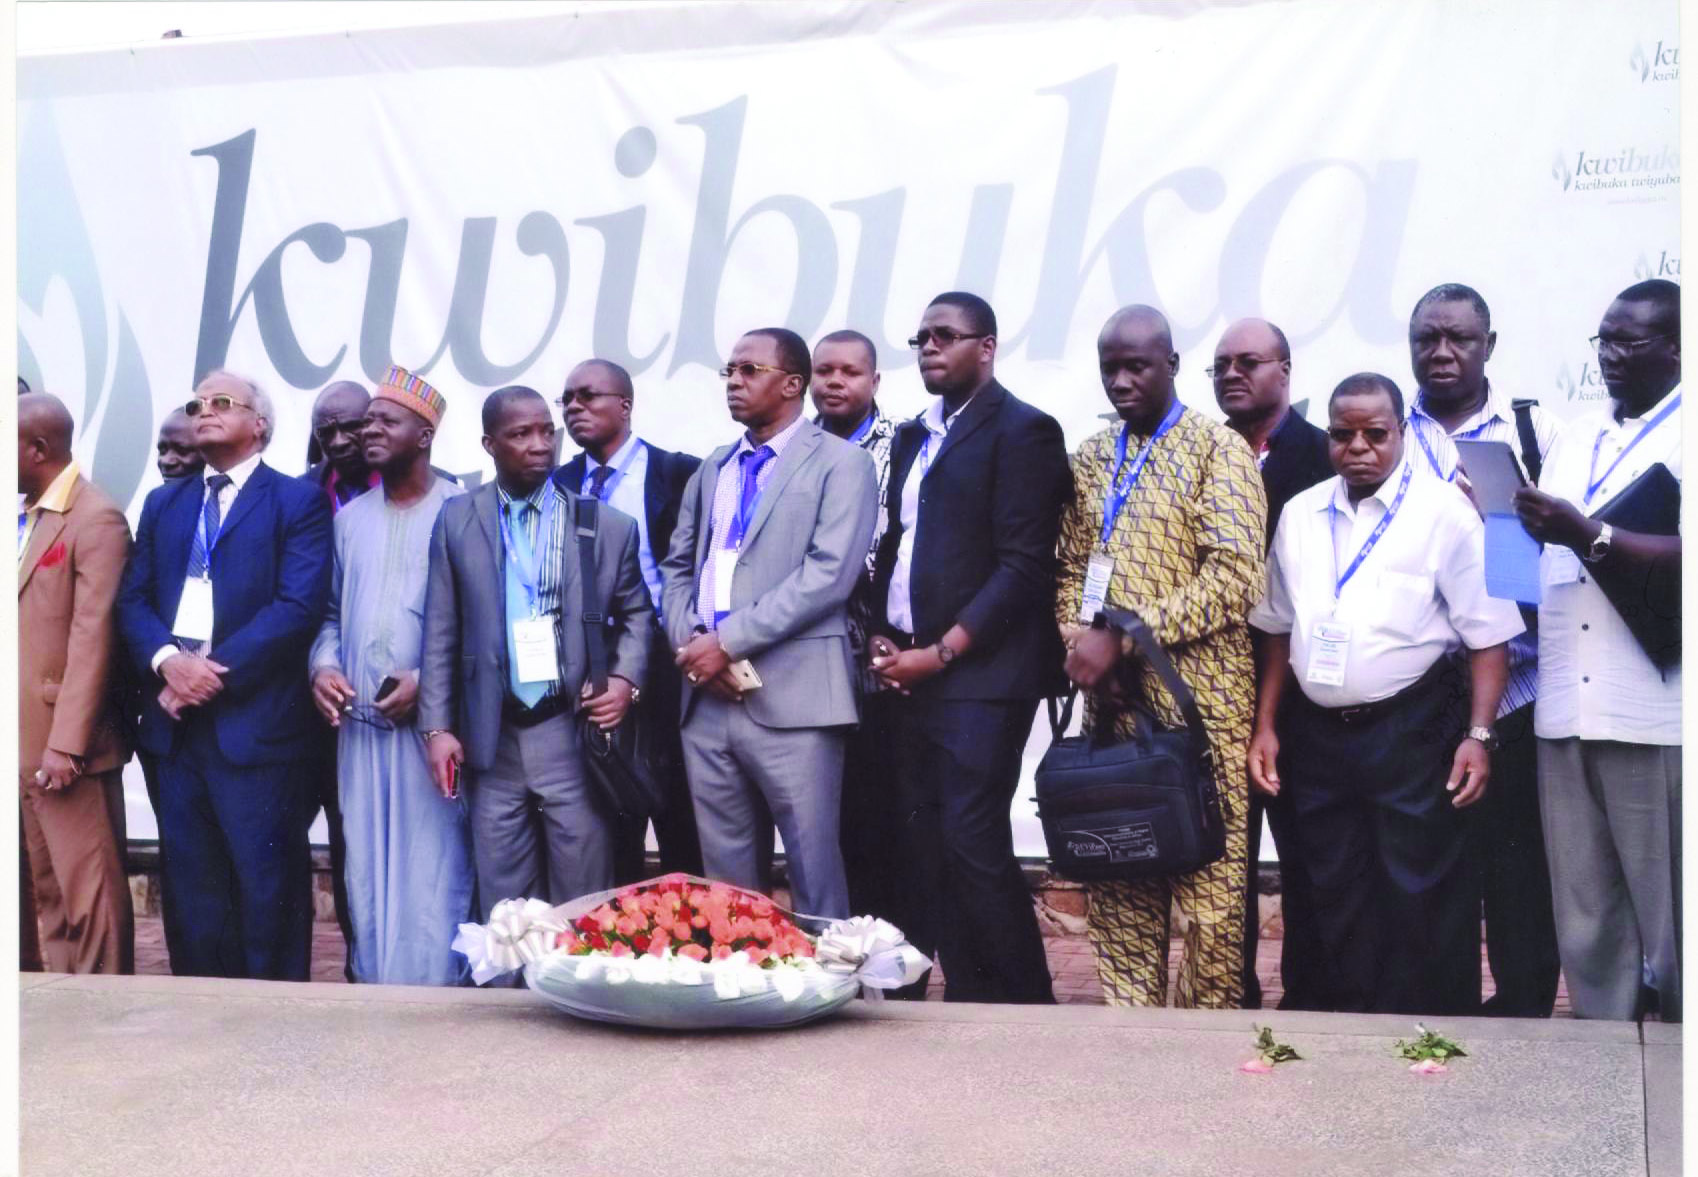 Prof Ambali (3rd from left) with other participants of the Conference of Rectors, Vice Chancellors and Presidents (COREViP) of African Universities, as they honour the victims of the 1994 genocide, at the Rwanda Memorial, Kigali.